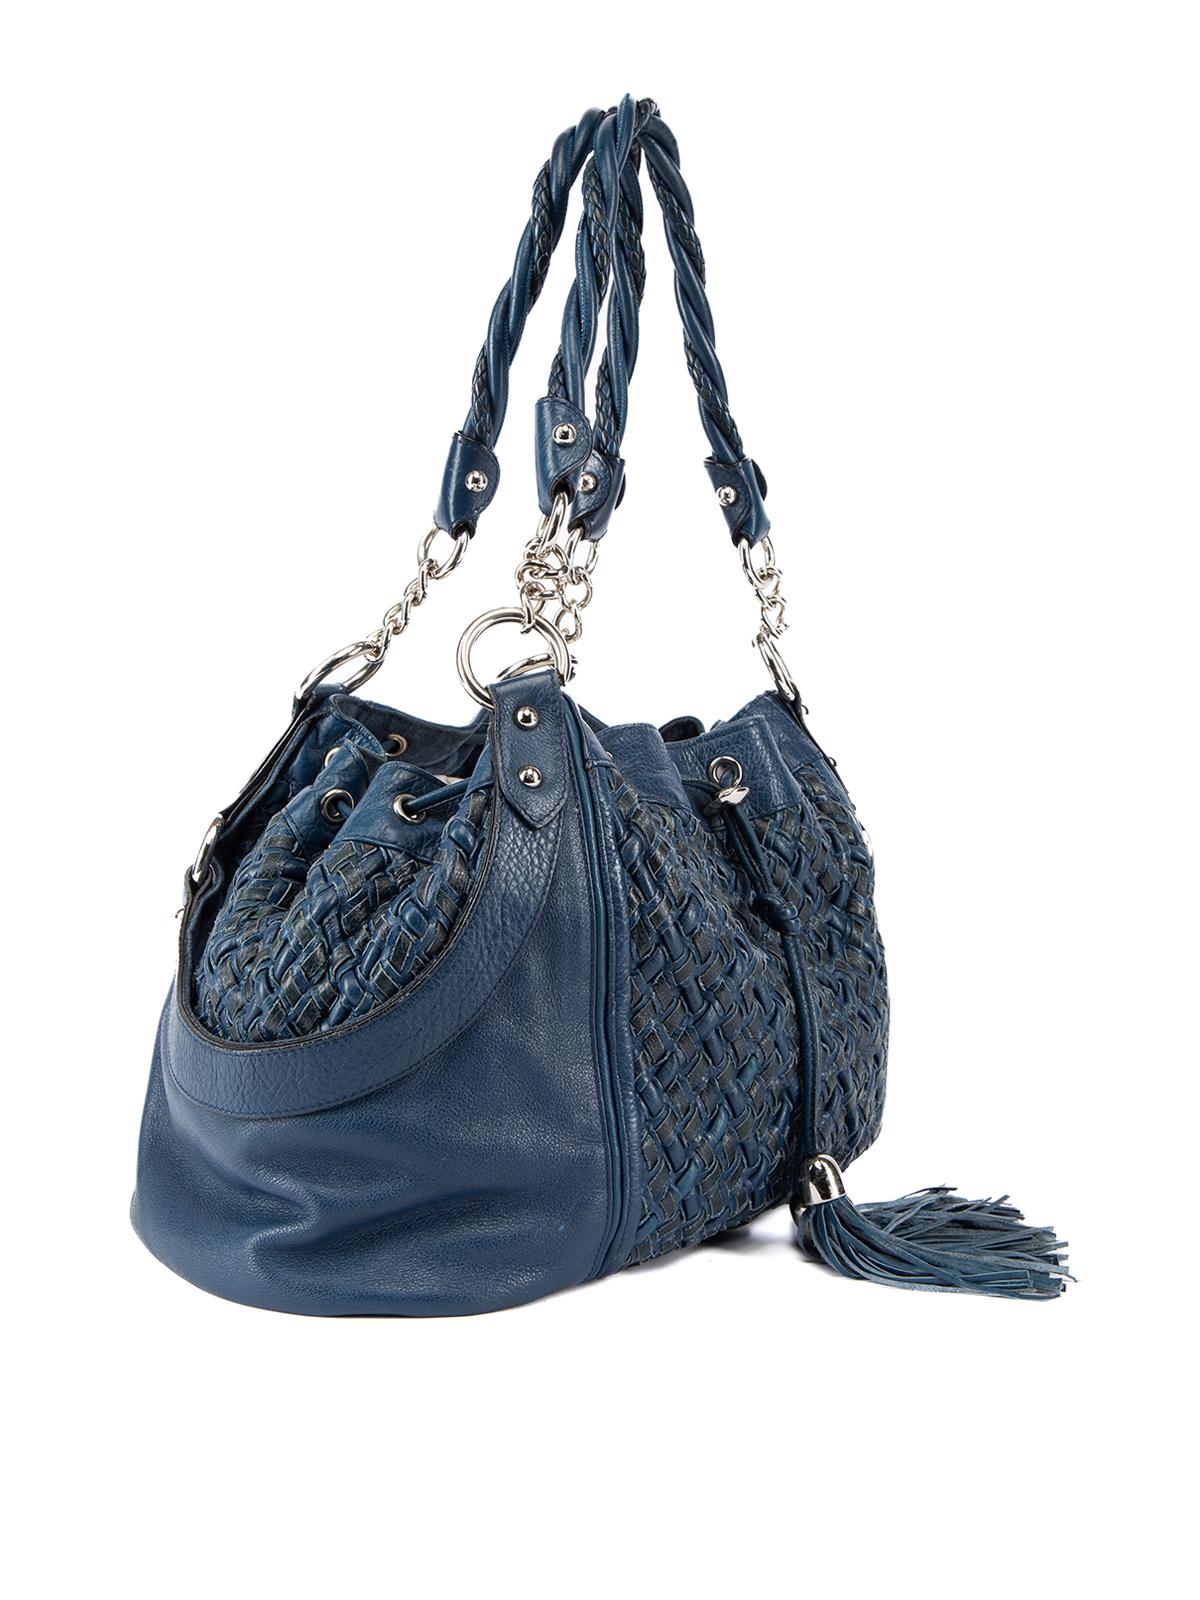 CONDITION is Good. Overall wear to bag is evident. Wear to woven leather is visible. Pilling and stains to interior suede material on this used Zac Posen designer resale item. Details Blue Leather Shoulder bag Woven design Drawstring fastening